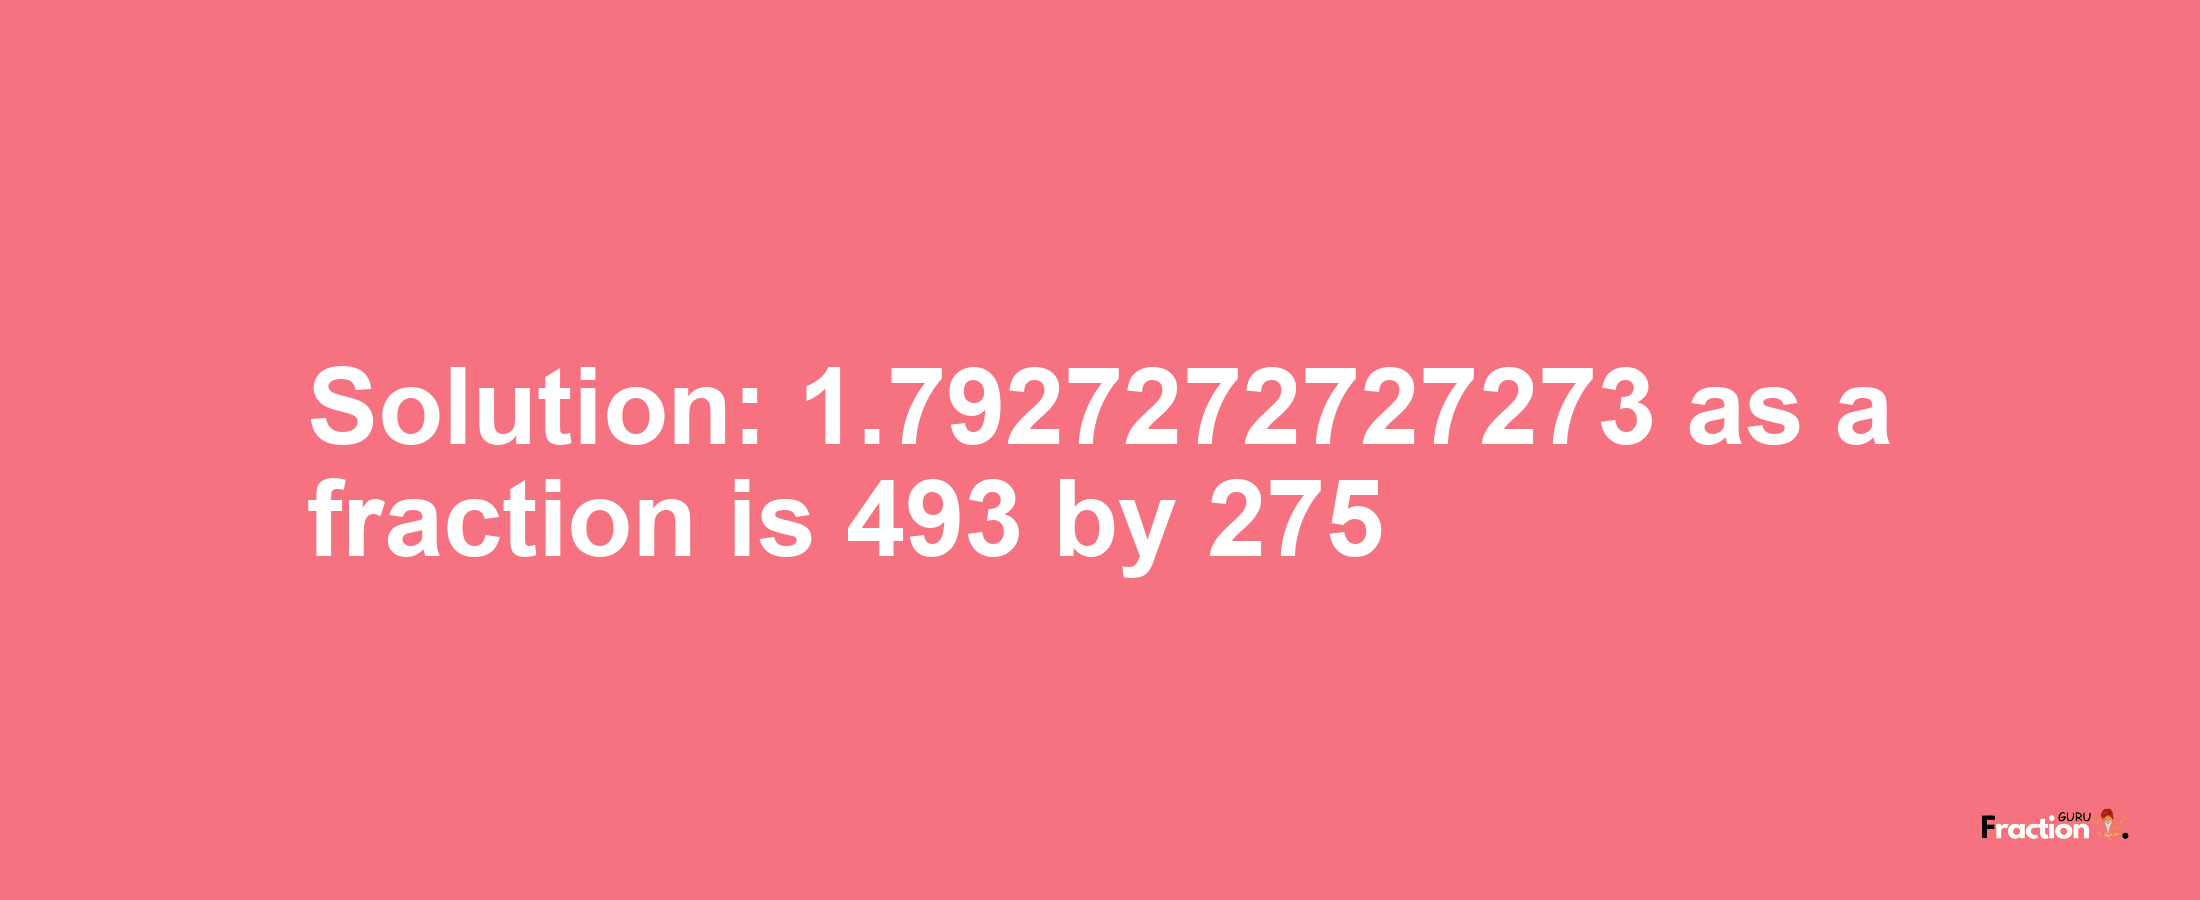 Solution:1.7927272727273 as a fraction is 493/275